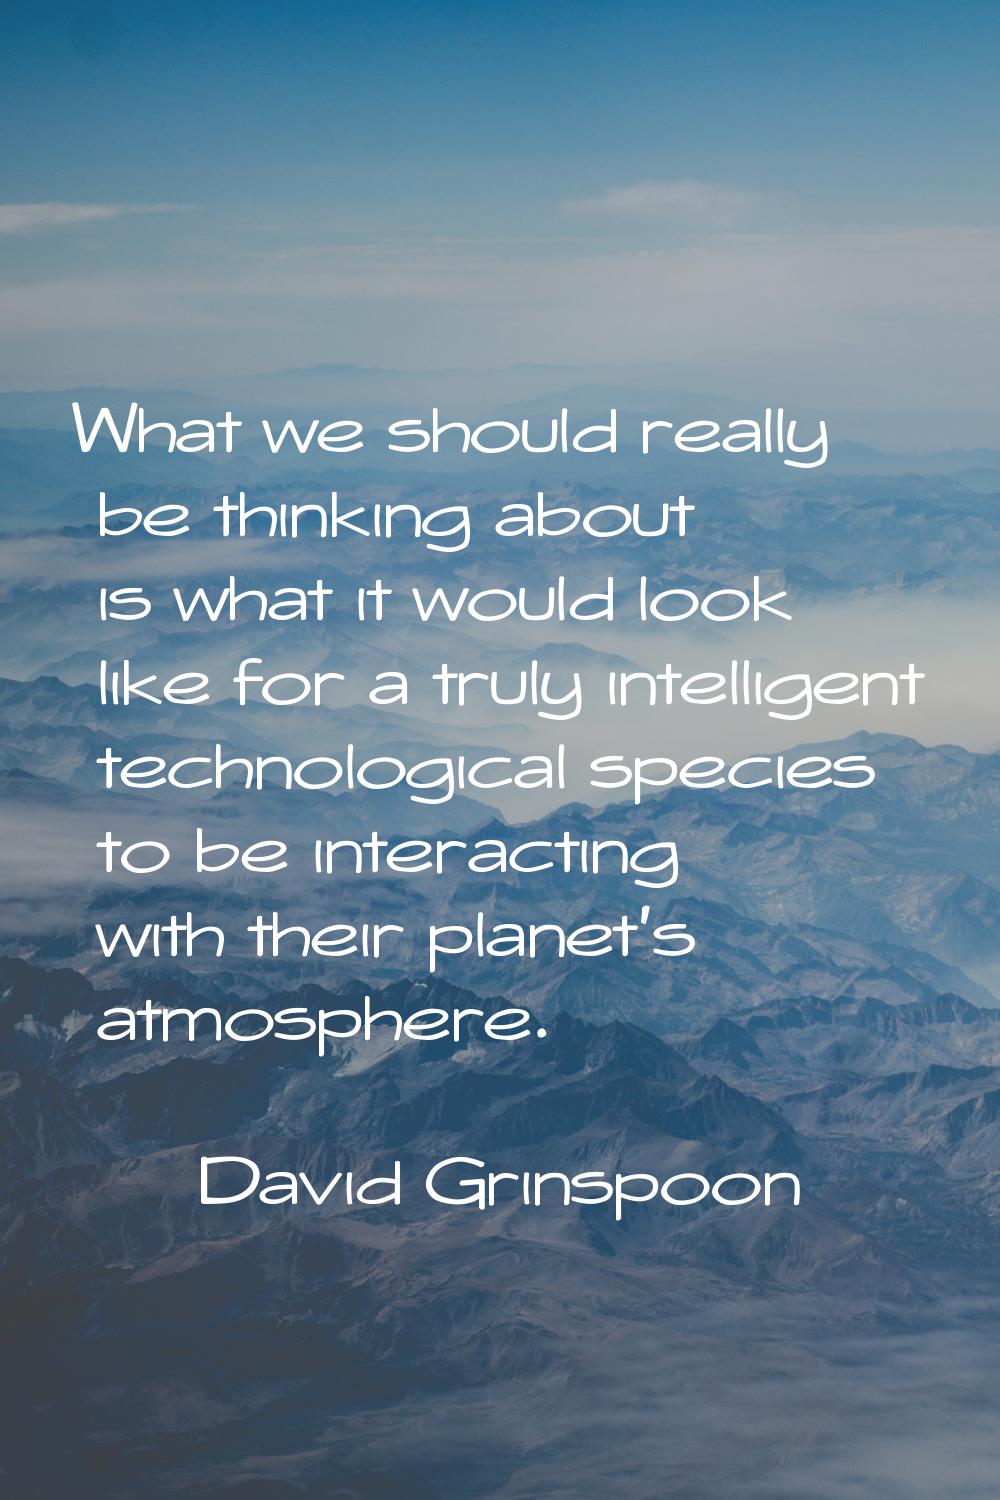 What we should really be thinking about is what it would look like for a truly intelligent technolo